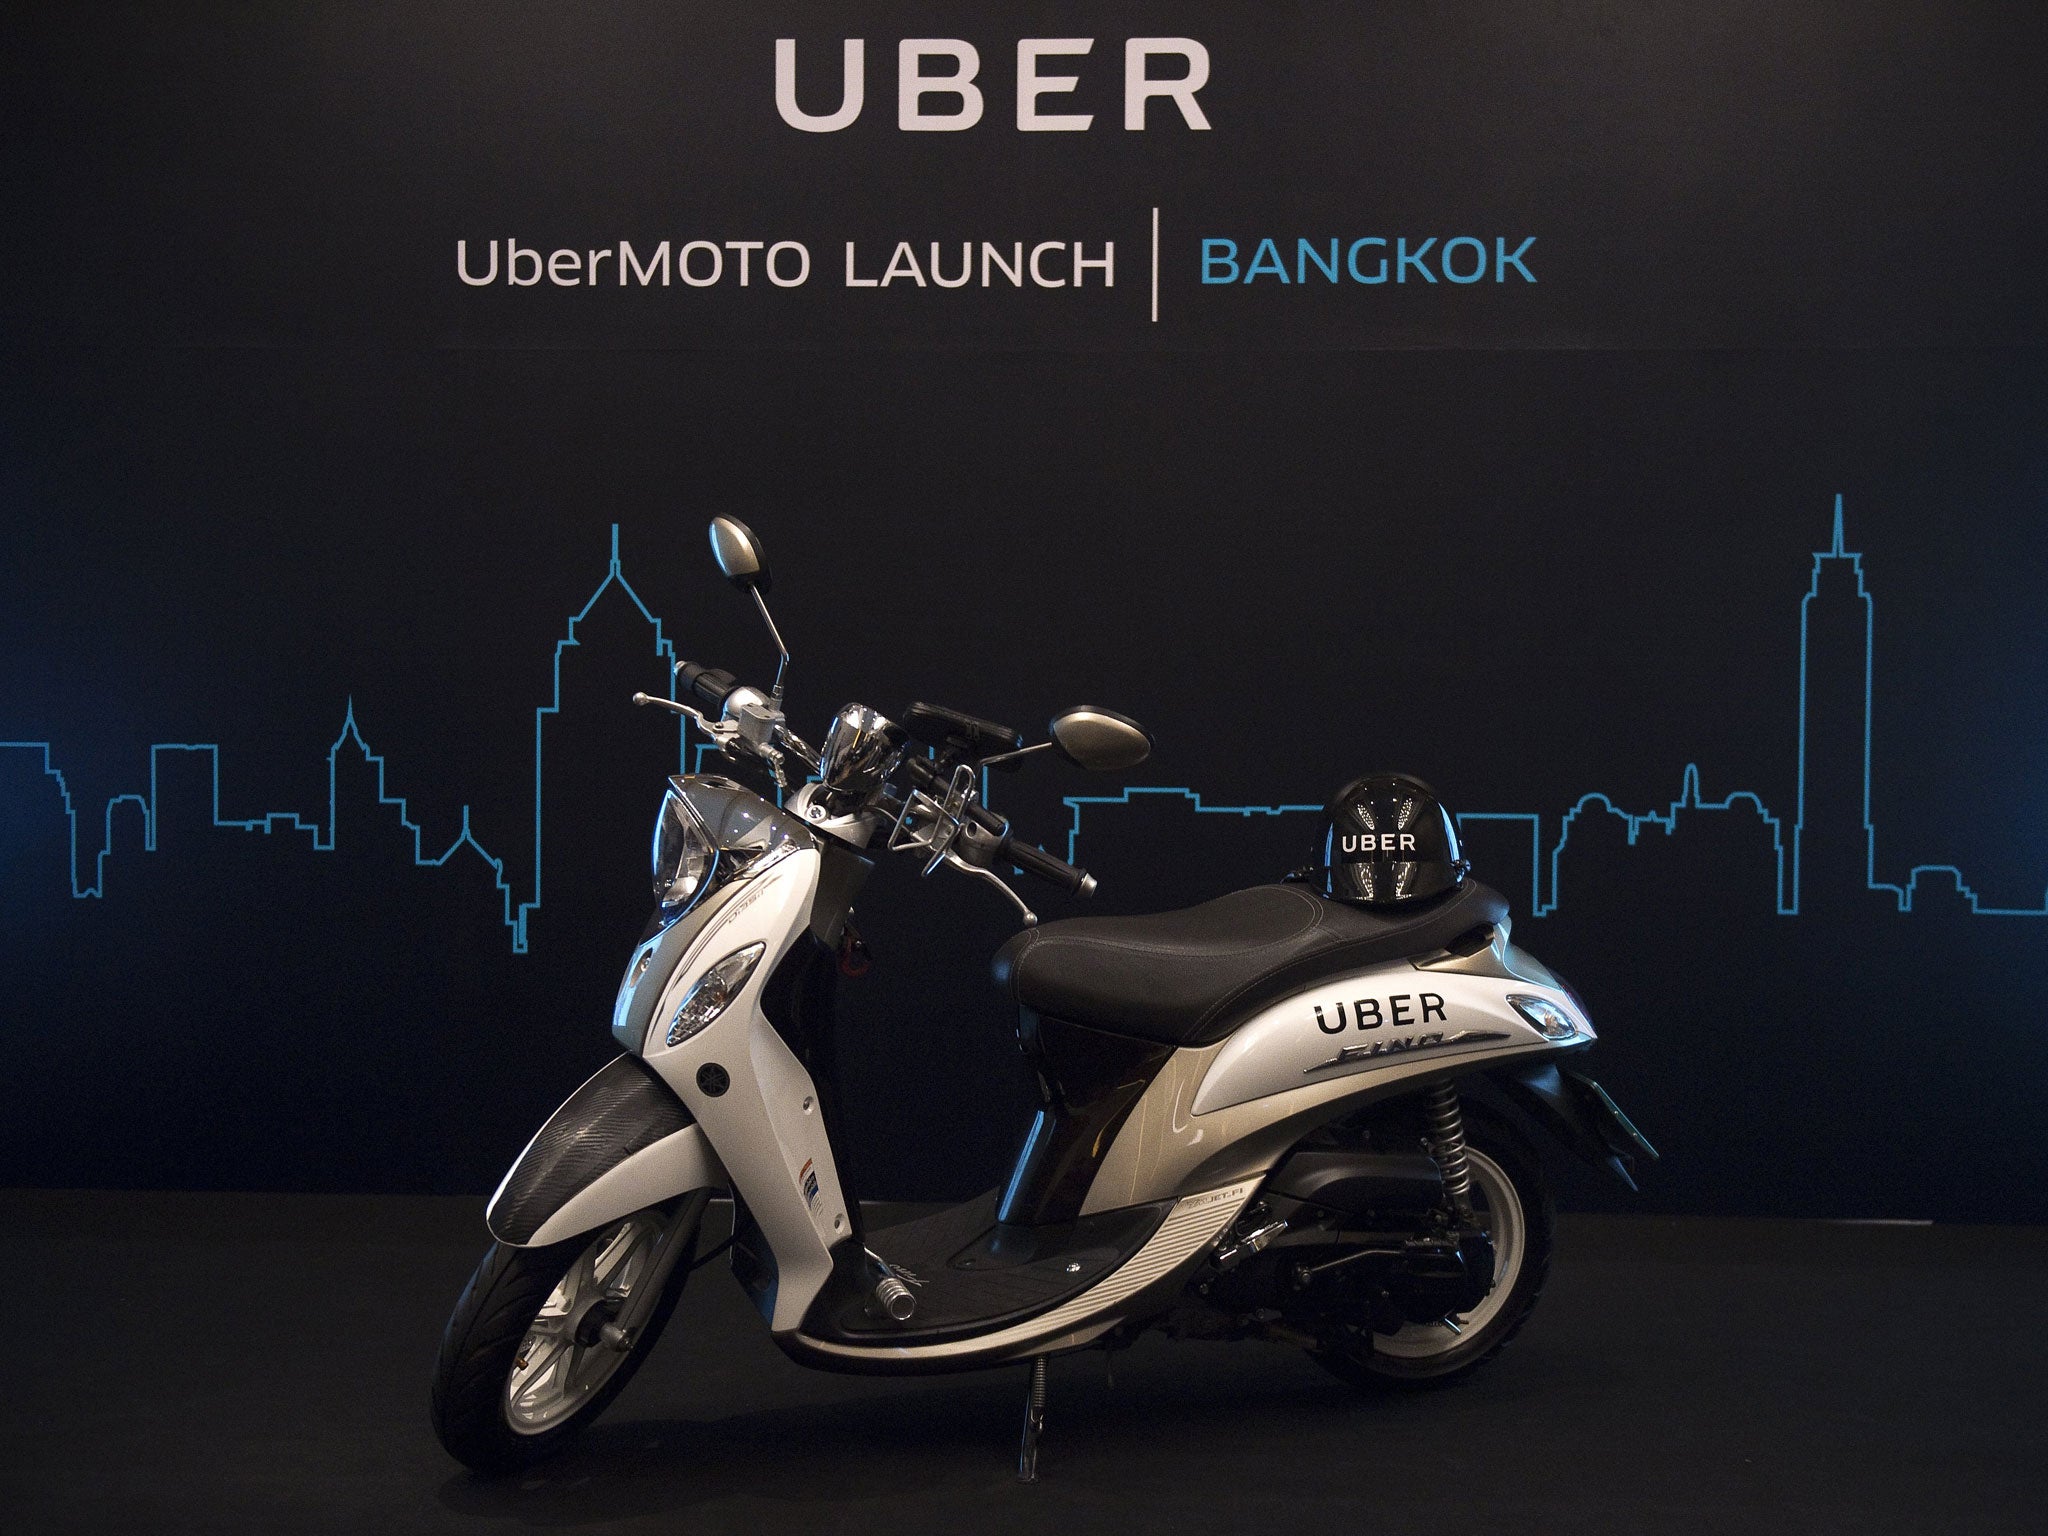 Uber offered its first motorbike taxi service on February 24, launching a pilot scheme in Bangkok which could spread across Asia